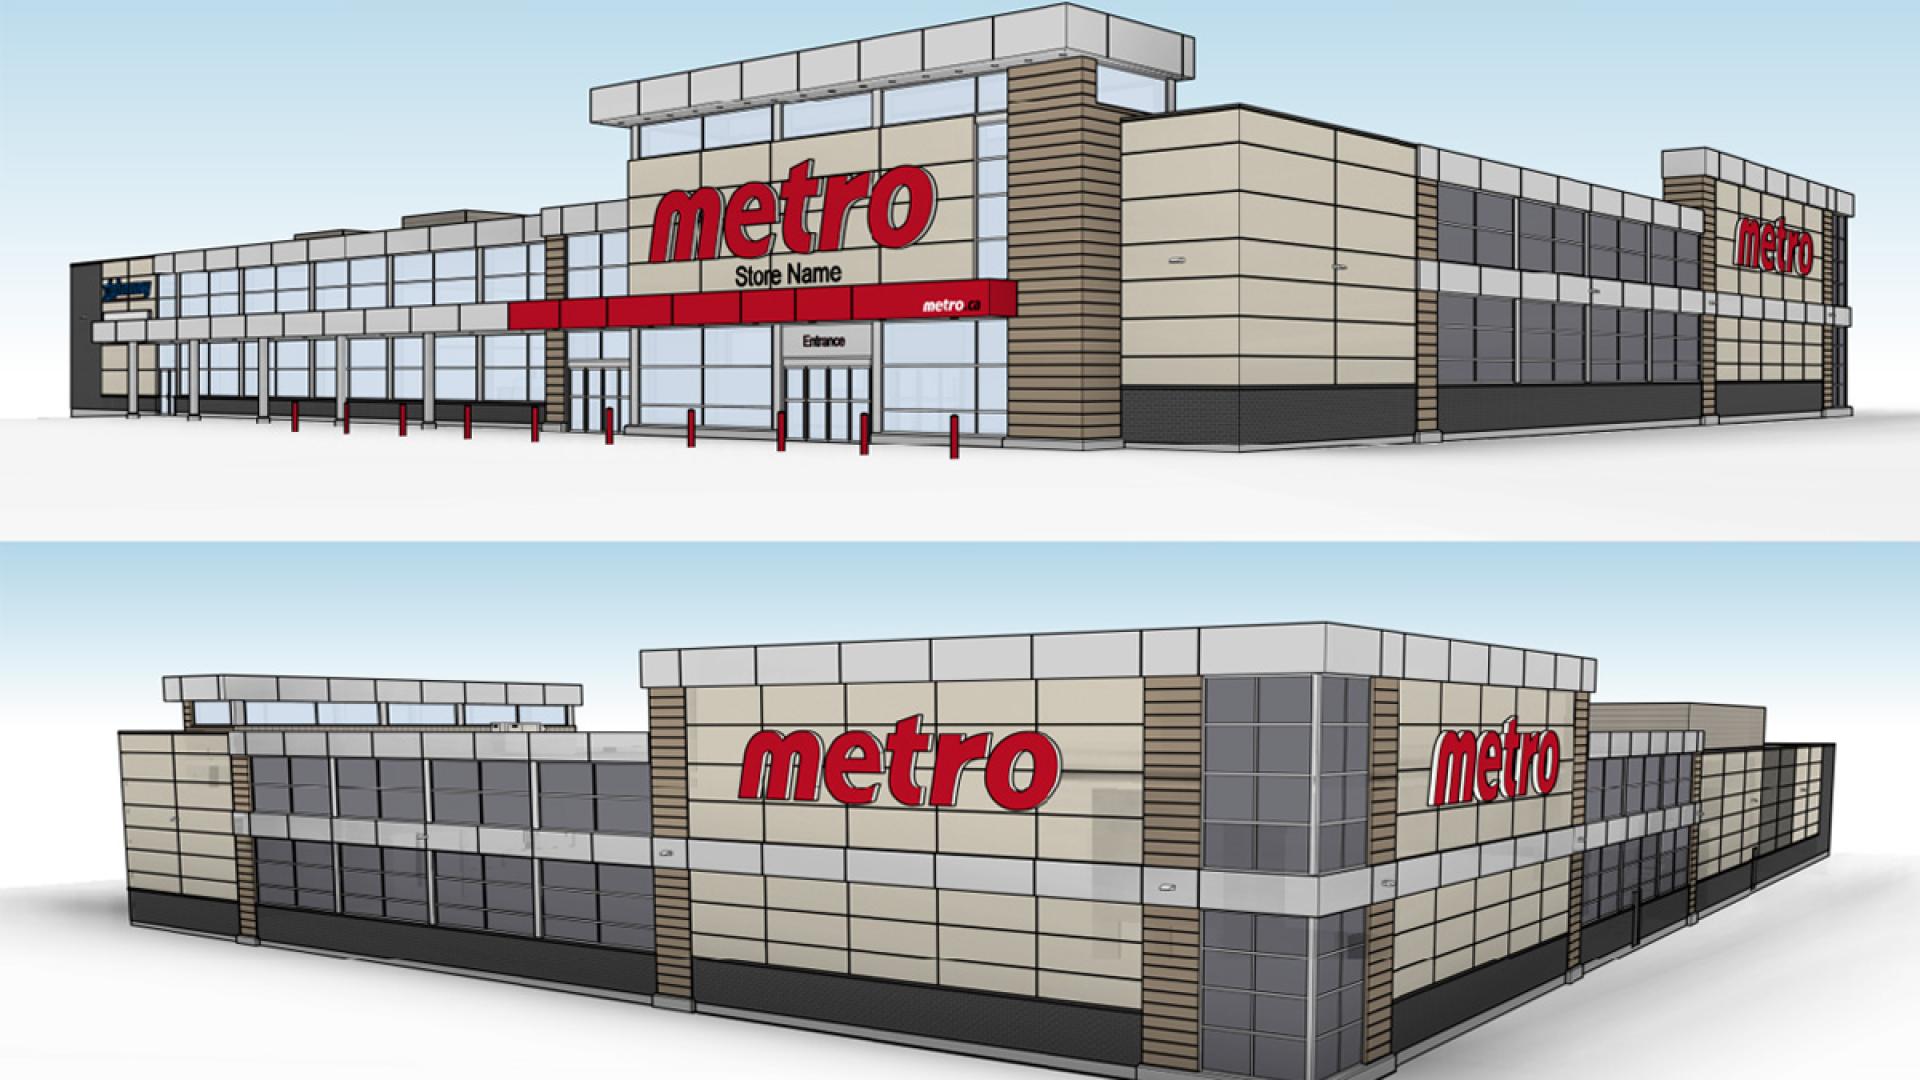 Rendering of proposed development (Metro grocery store) at 658 Mapleview East